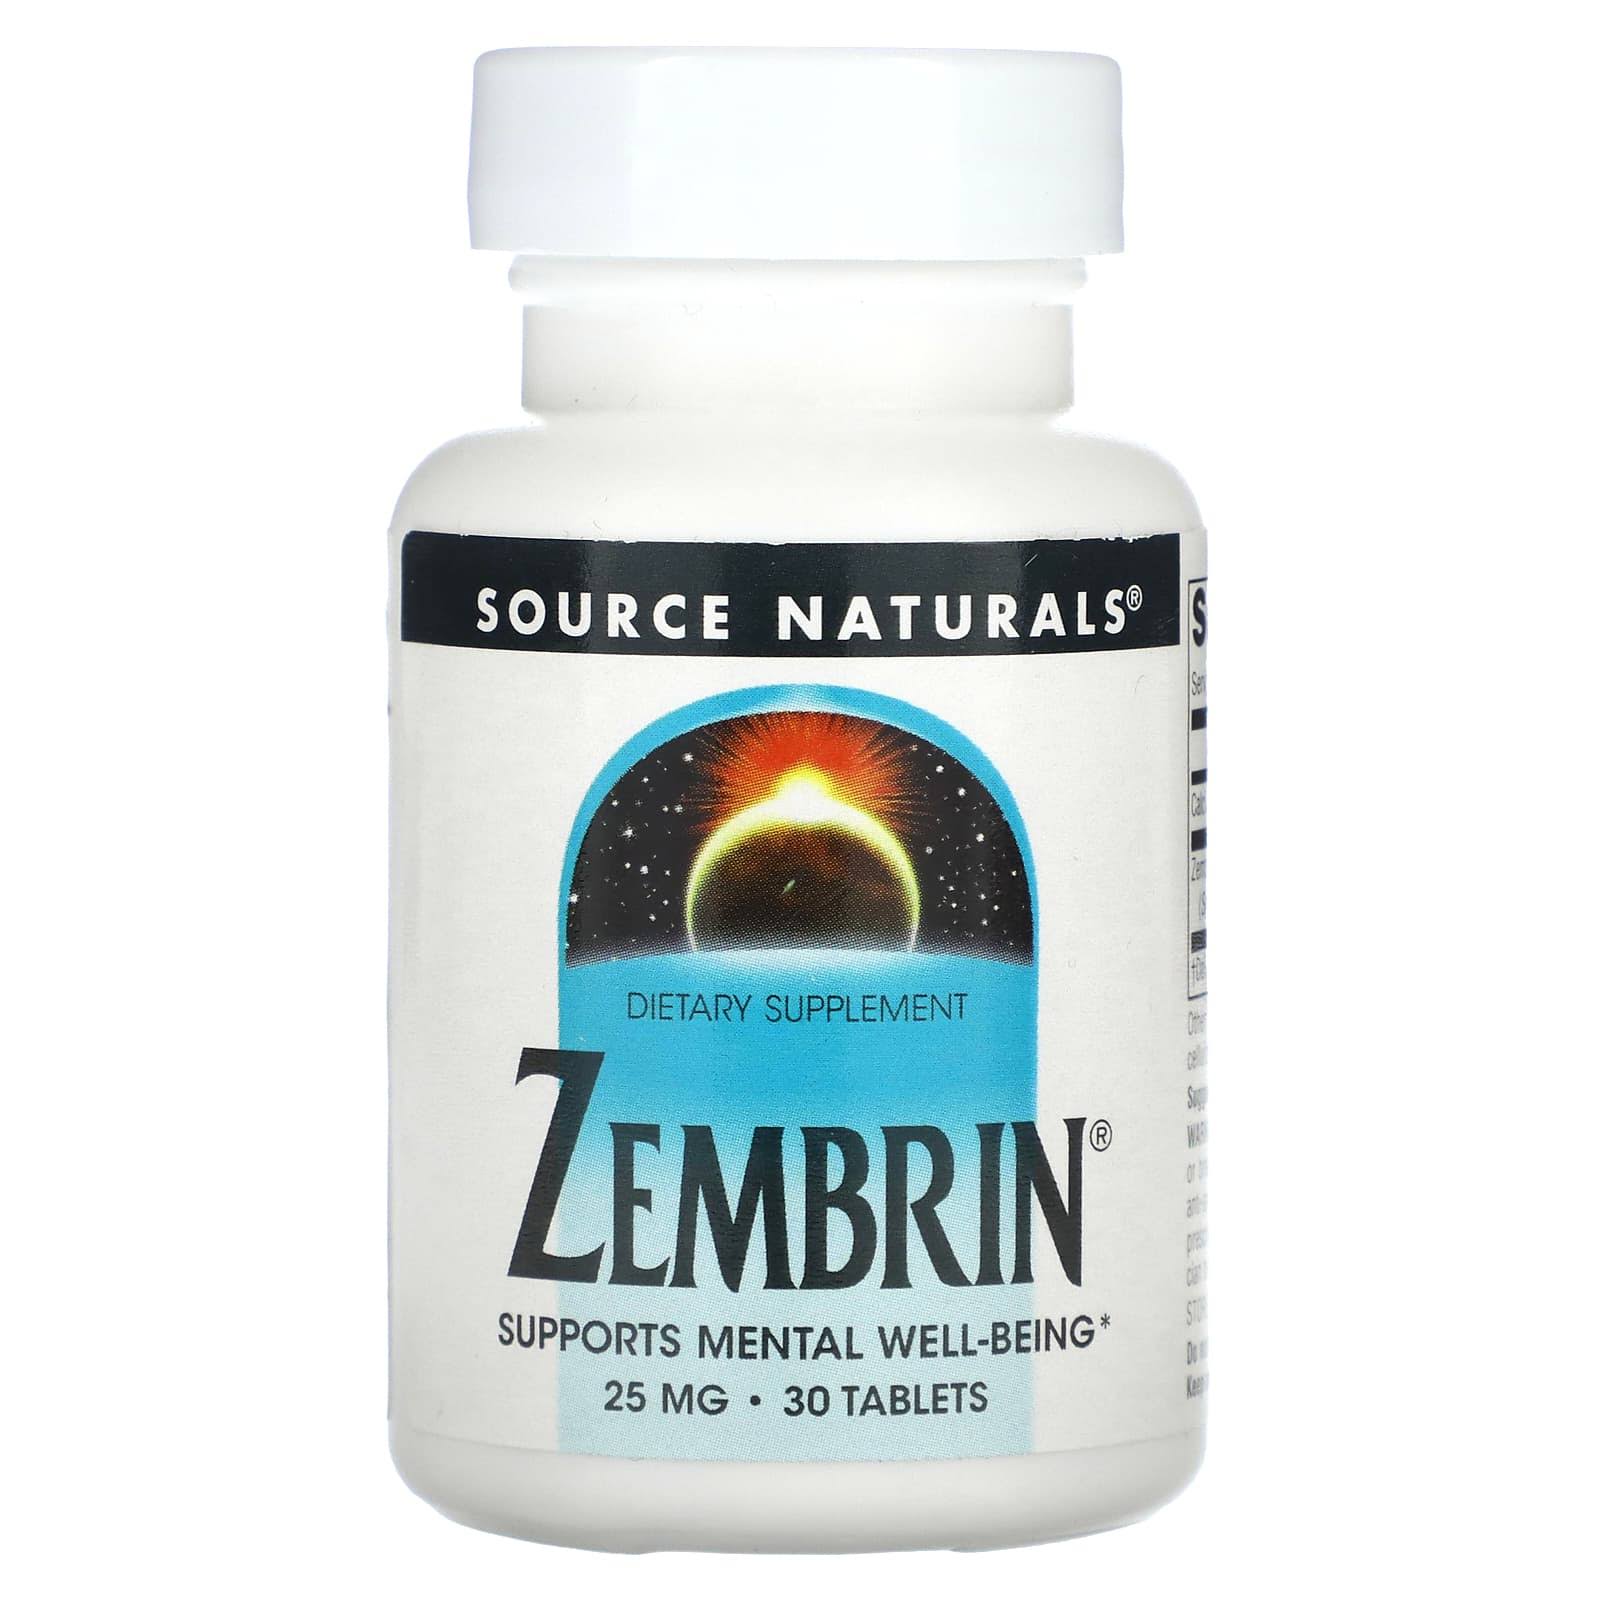 Source Naturals Zembrin Supports Mental Well-Being - 25 mg, 30 Tablets